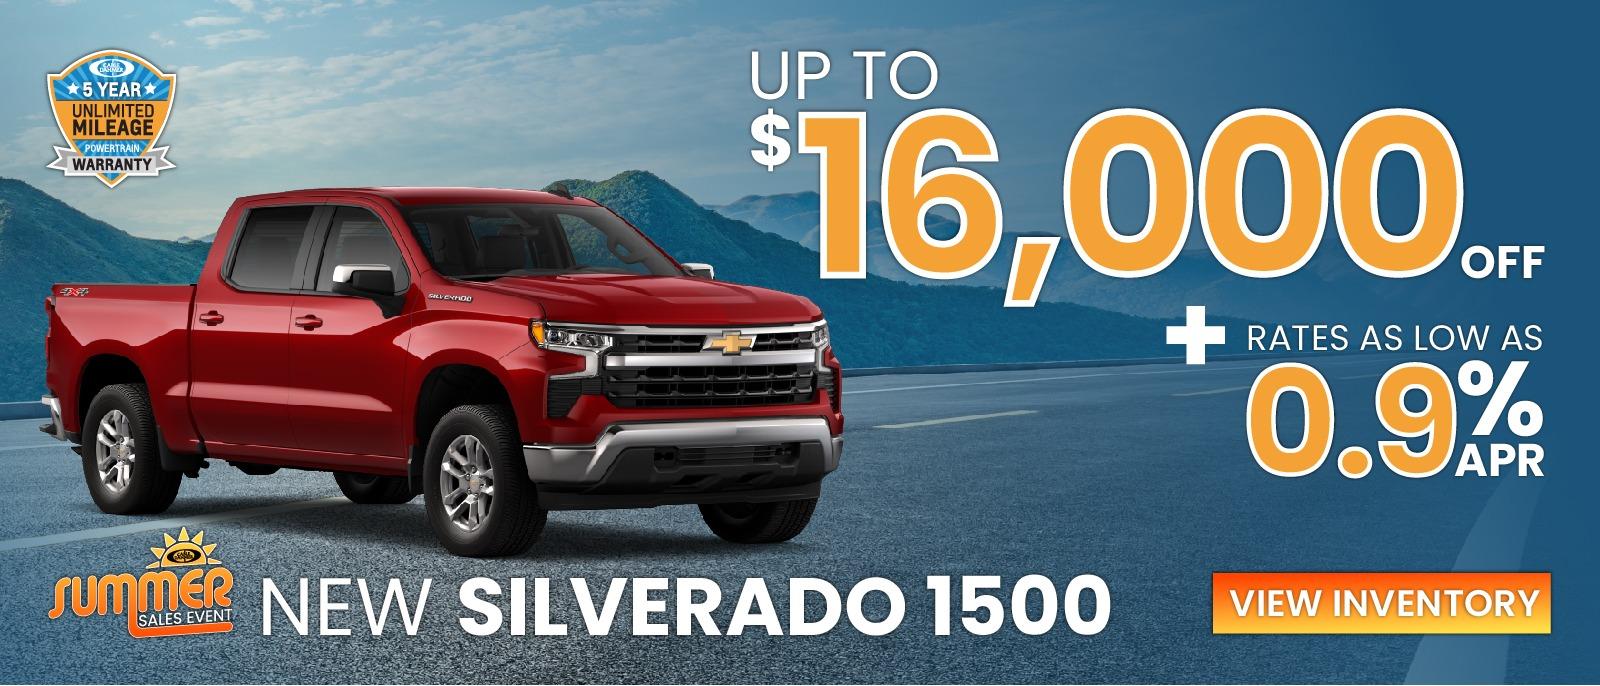 New Chevrolet Silverado 1500
Offer: Up to $16,000 off + as low as 0.9% APR